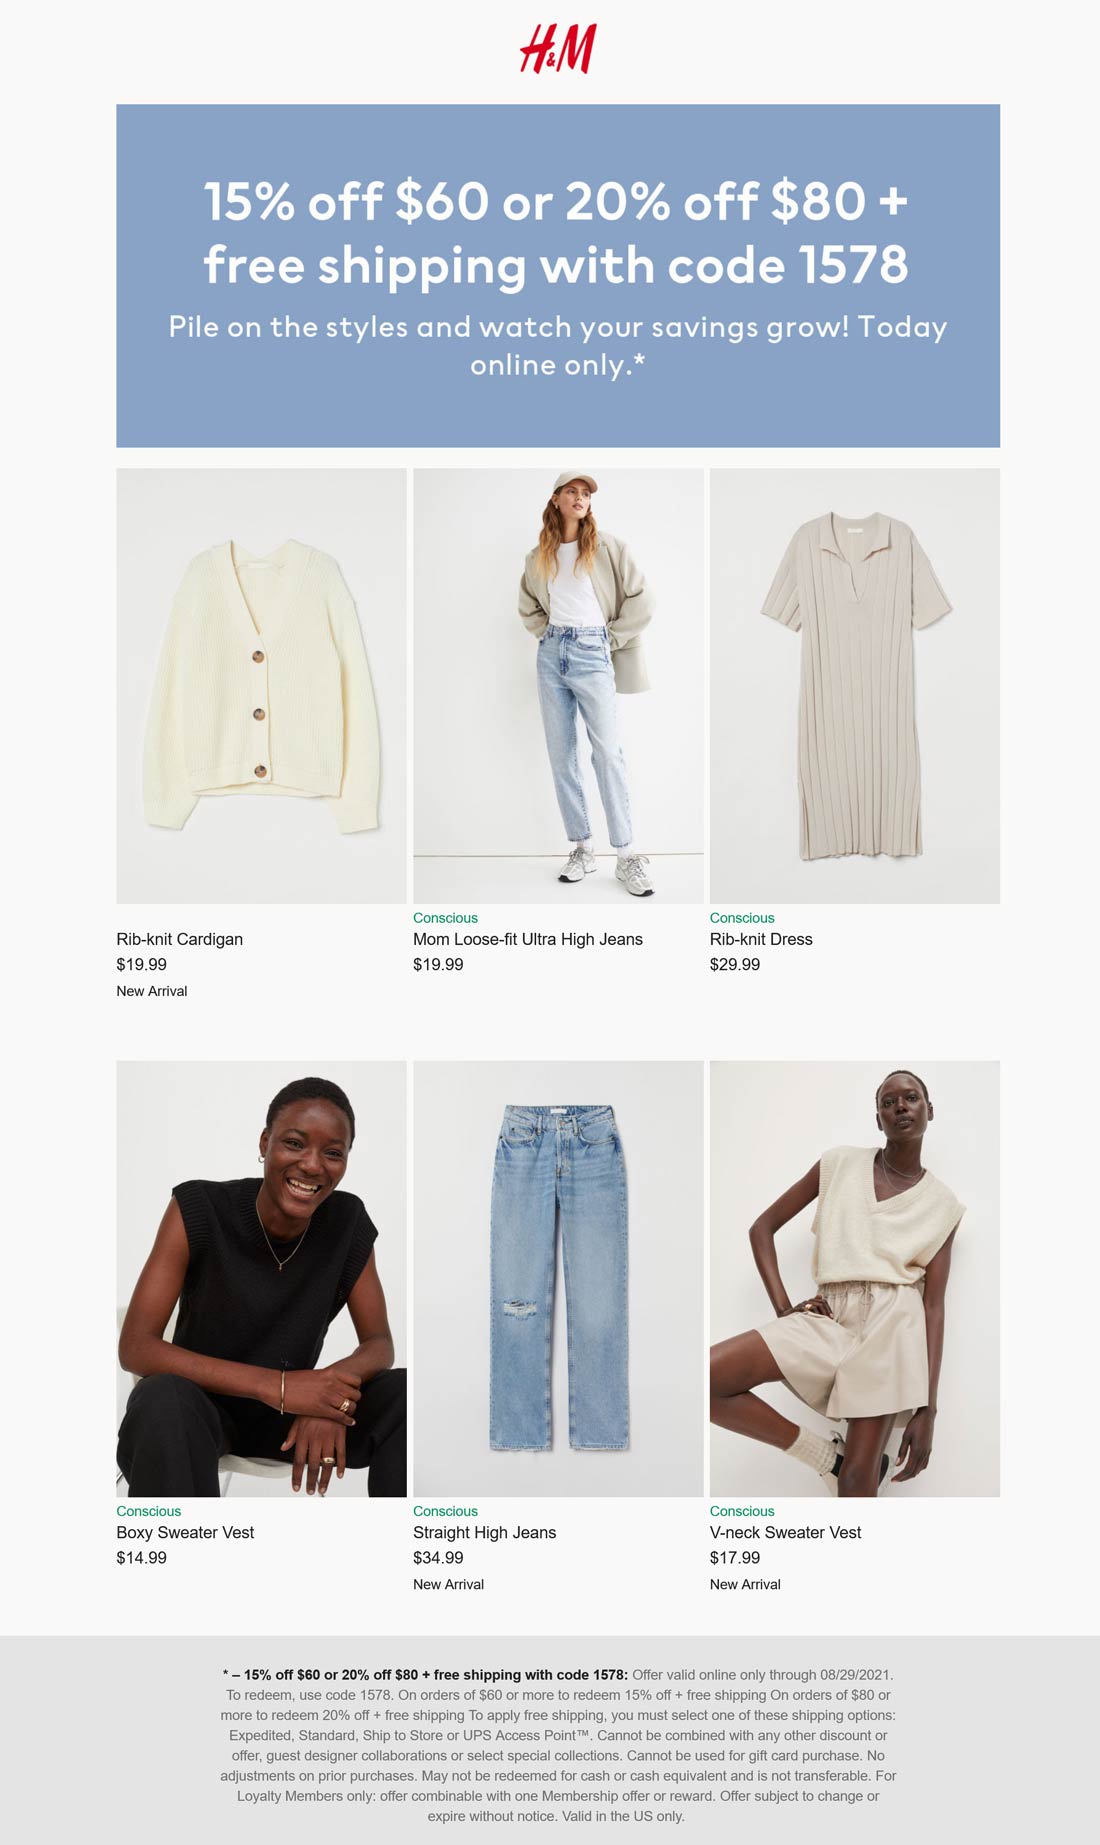 H&M stores Coupon  15-20% off $60+ online today at H&M via promo code 1578 #hm 